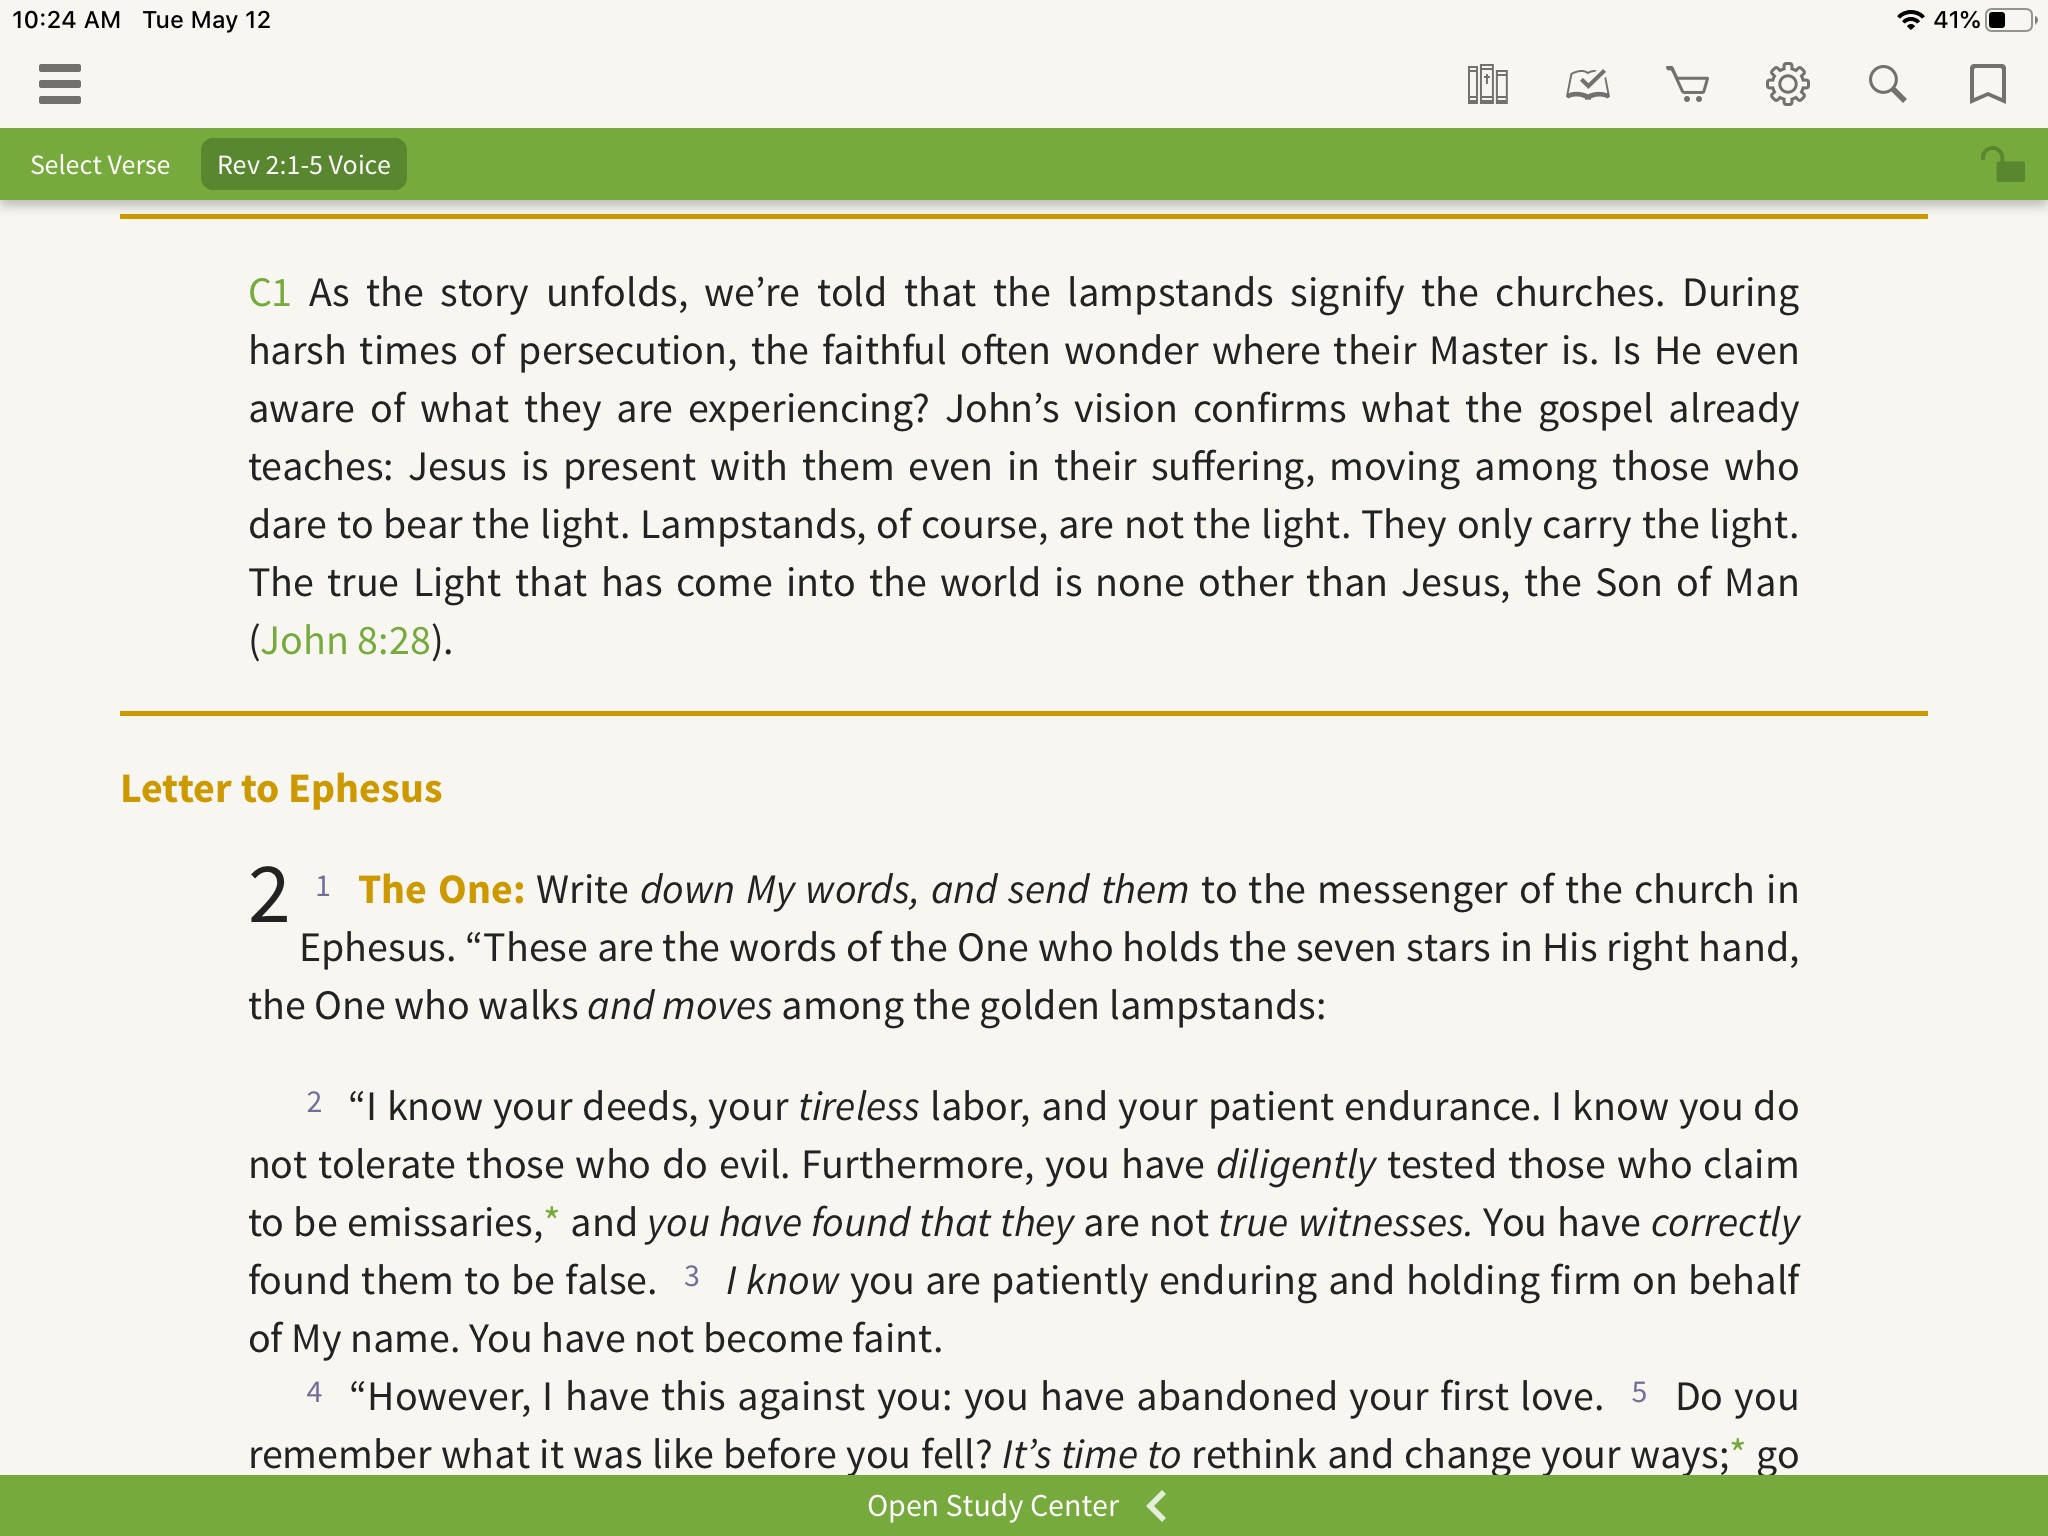 The Voice Bible Commentary notes